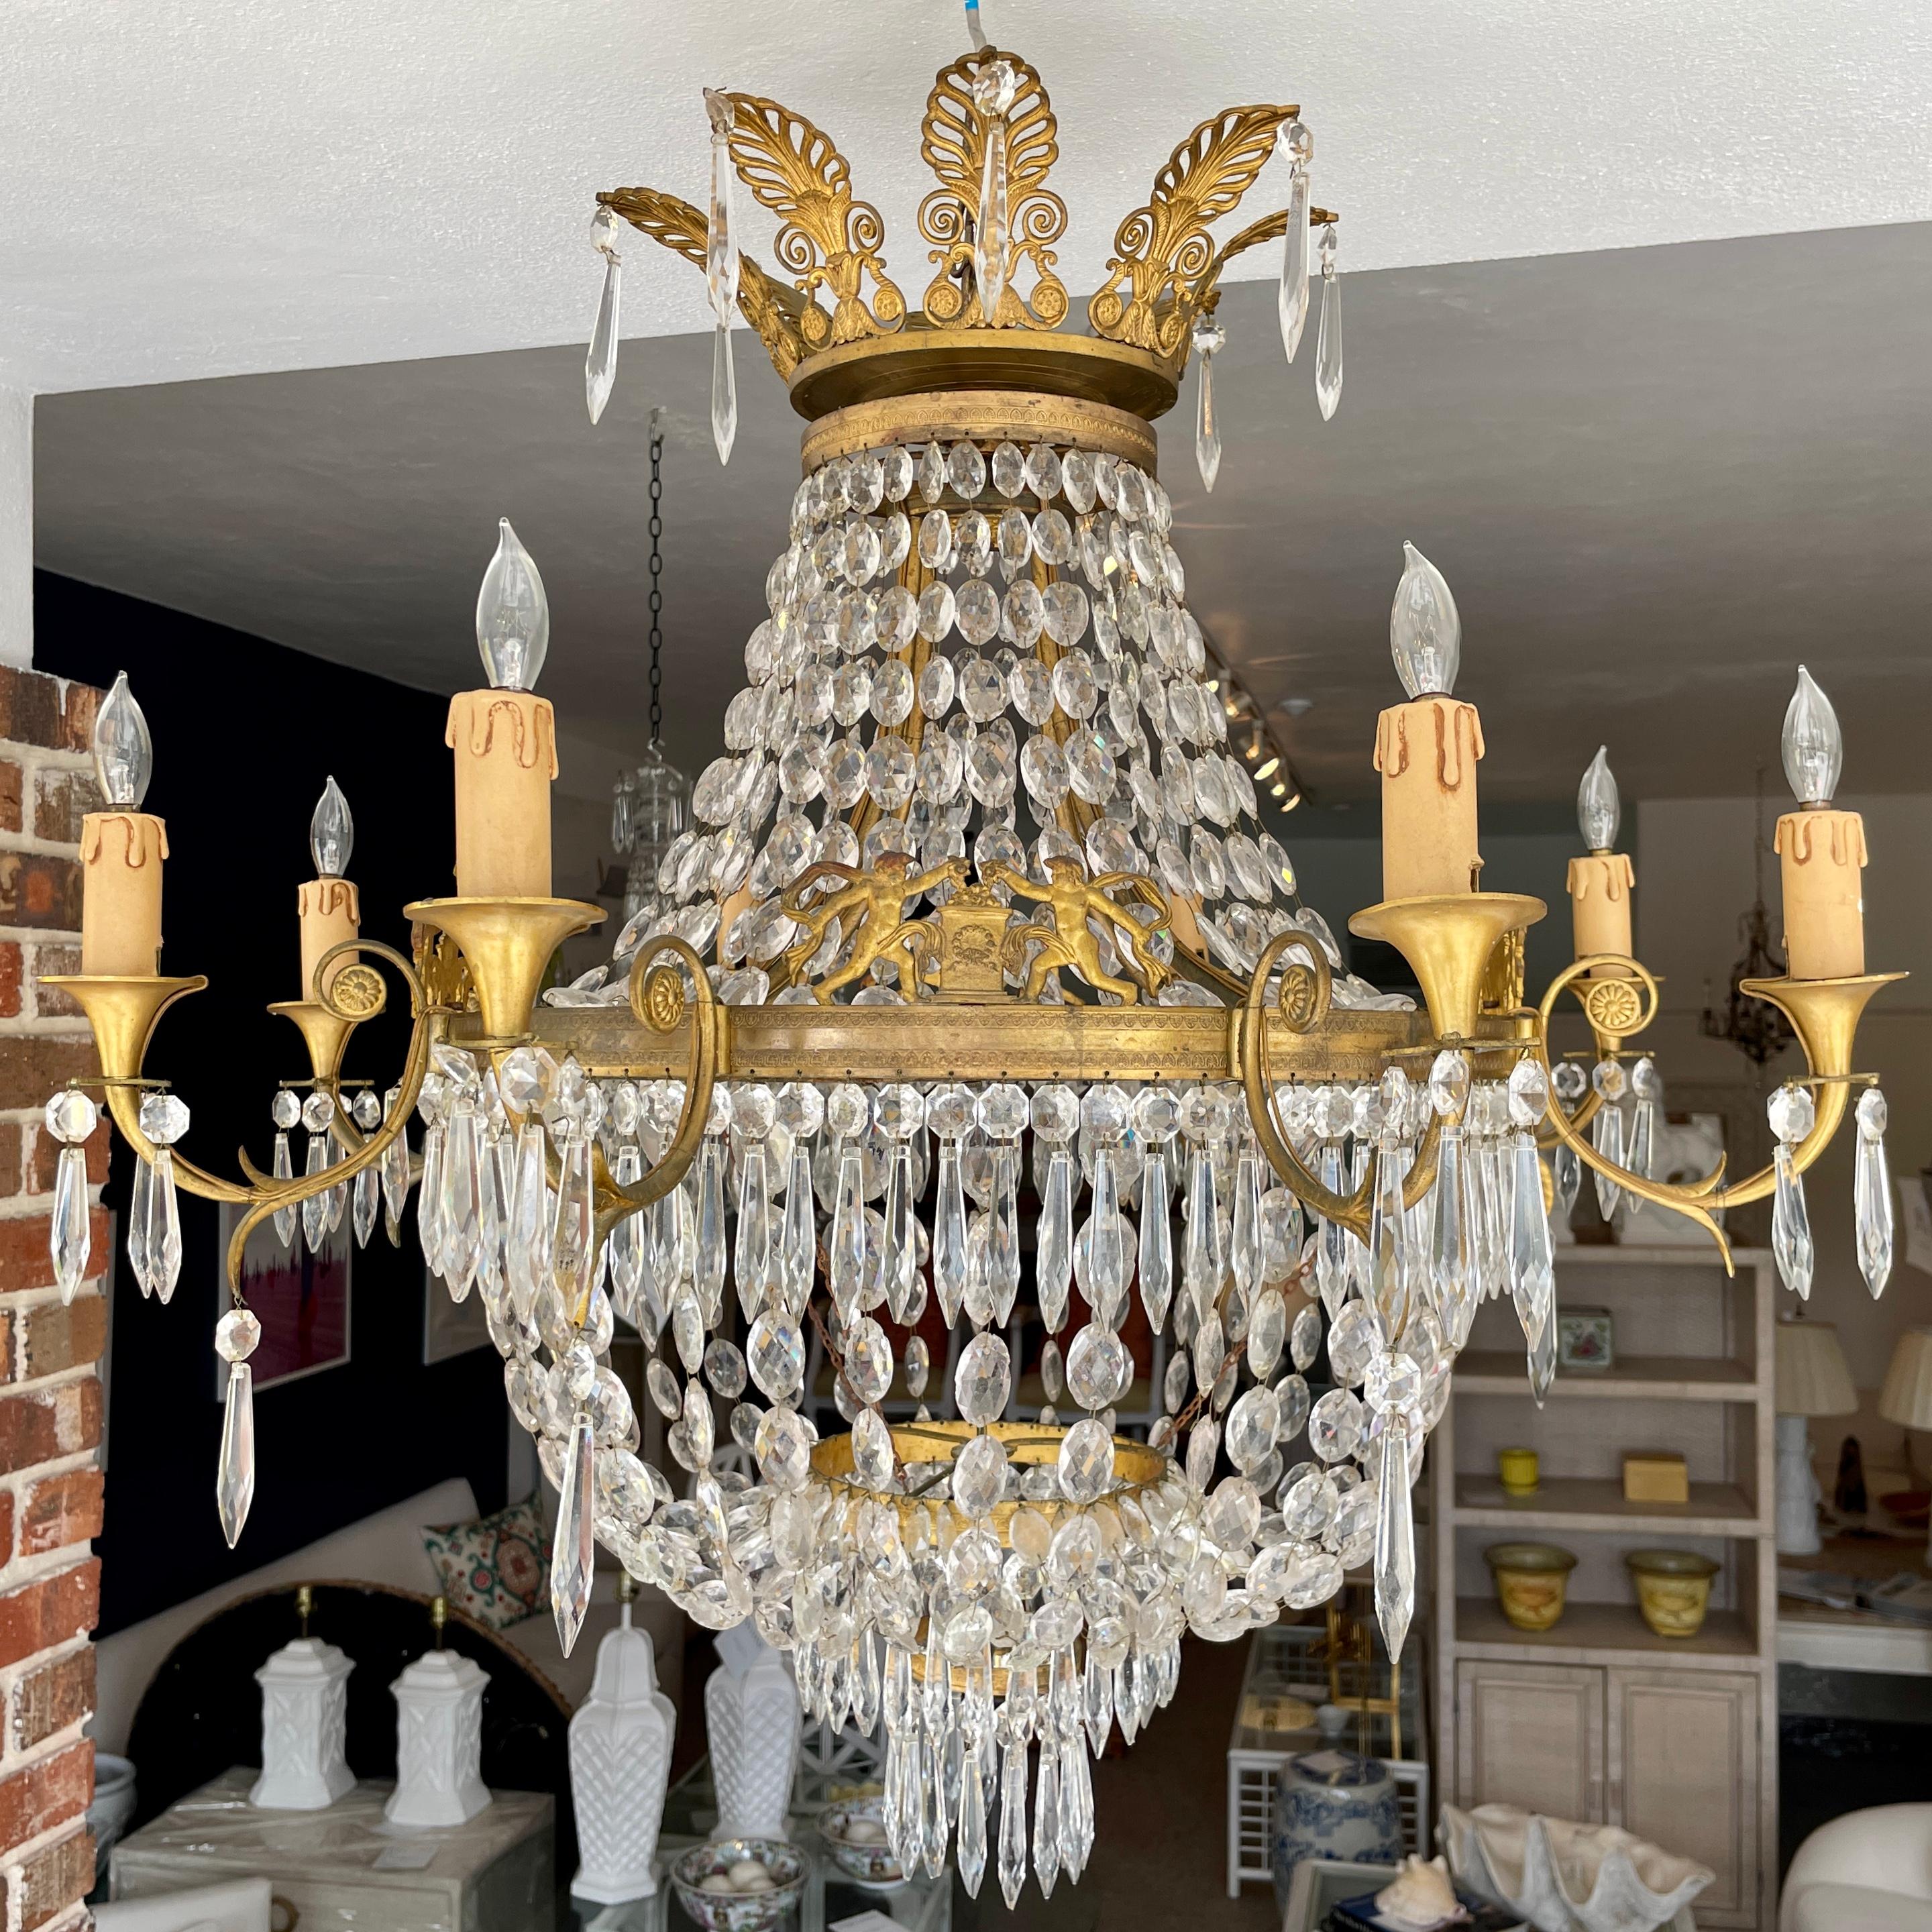 Beautiful French Empire Gilt Bronze and crystal chandelier. Amazing carving details on all sides of the bronze frame and the leaves crest at the top. Add some French Style to your home.